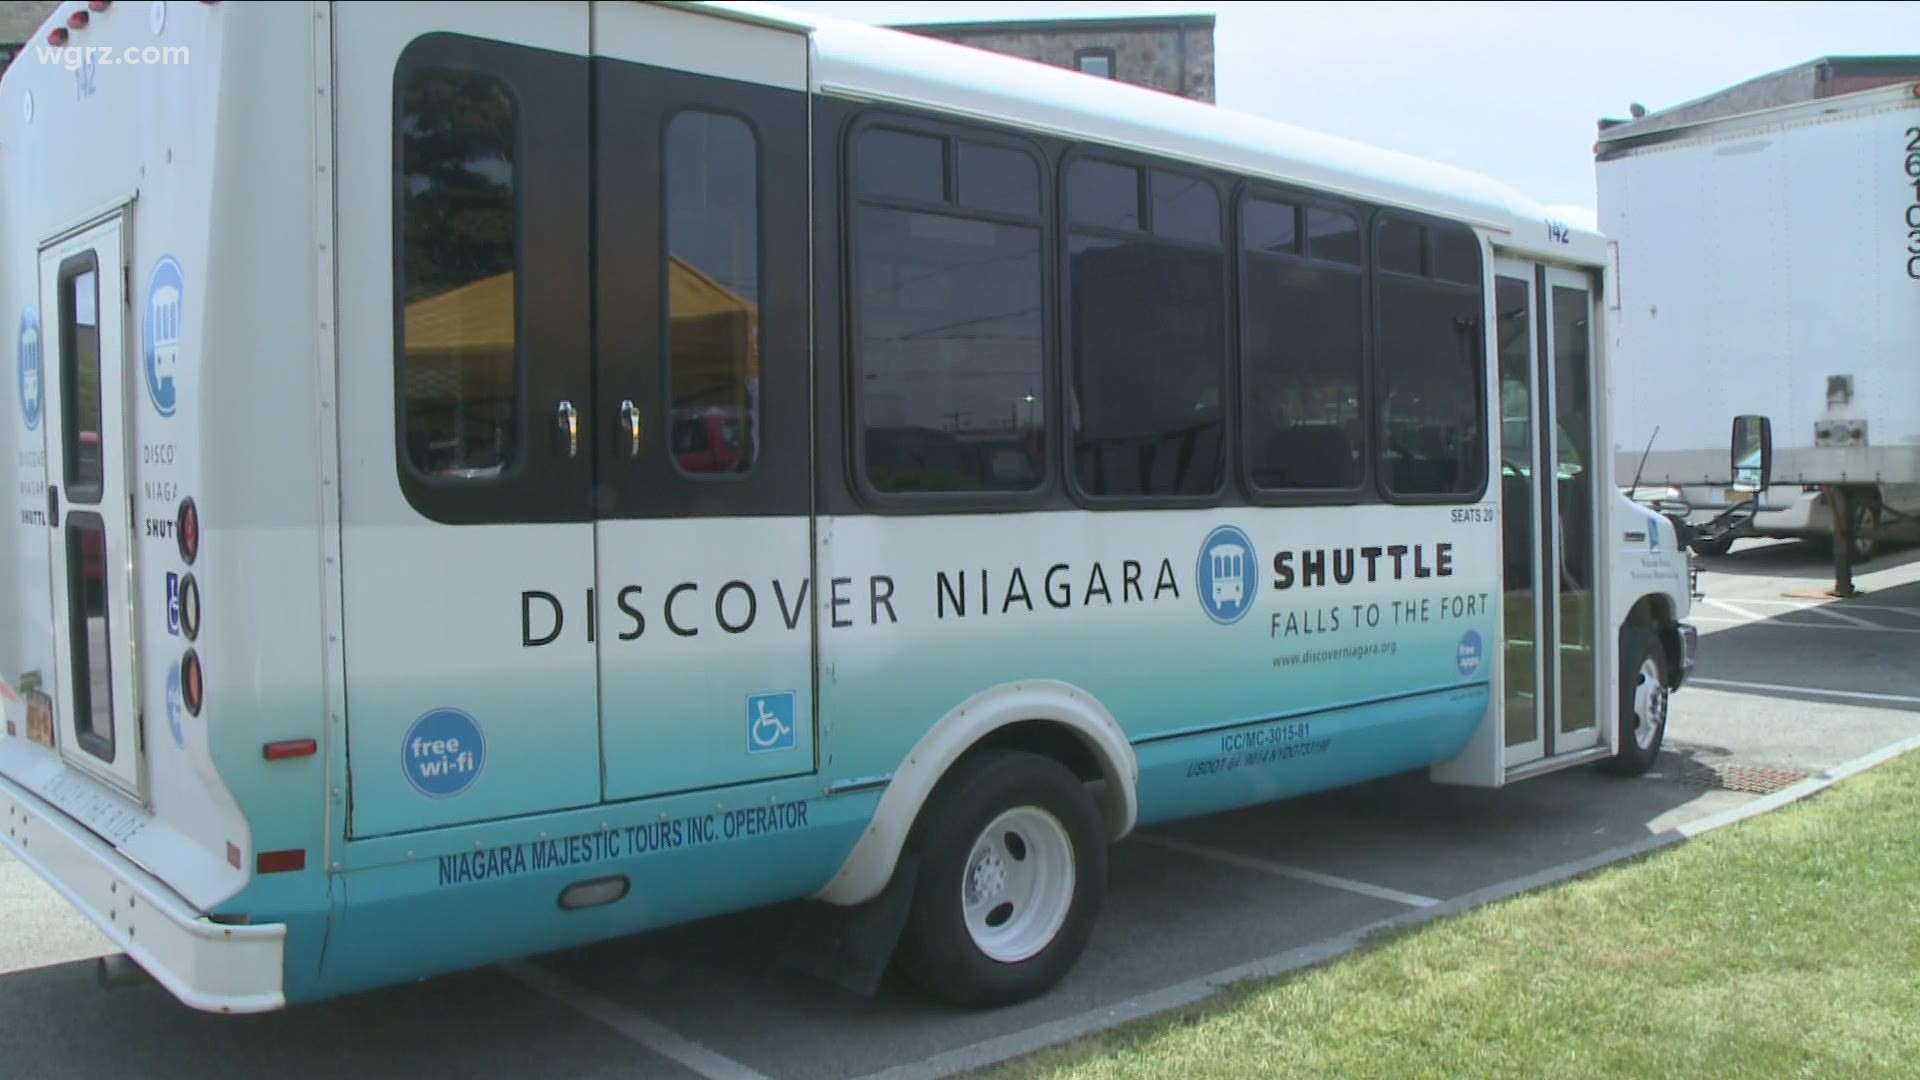 The bus route started as a pilot in 2016, but will now permanently connect the two cities.